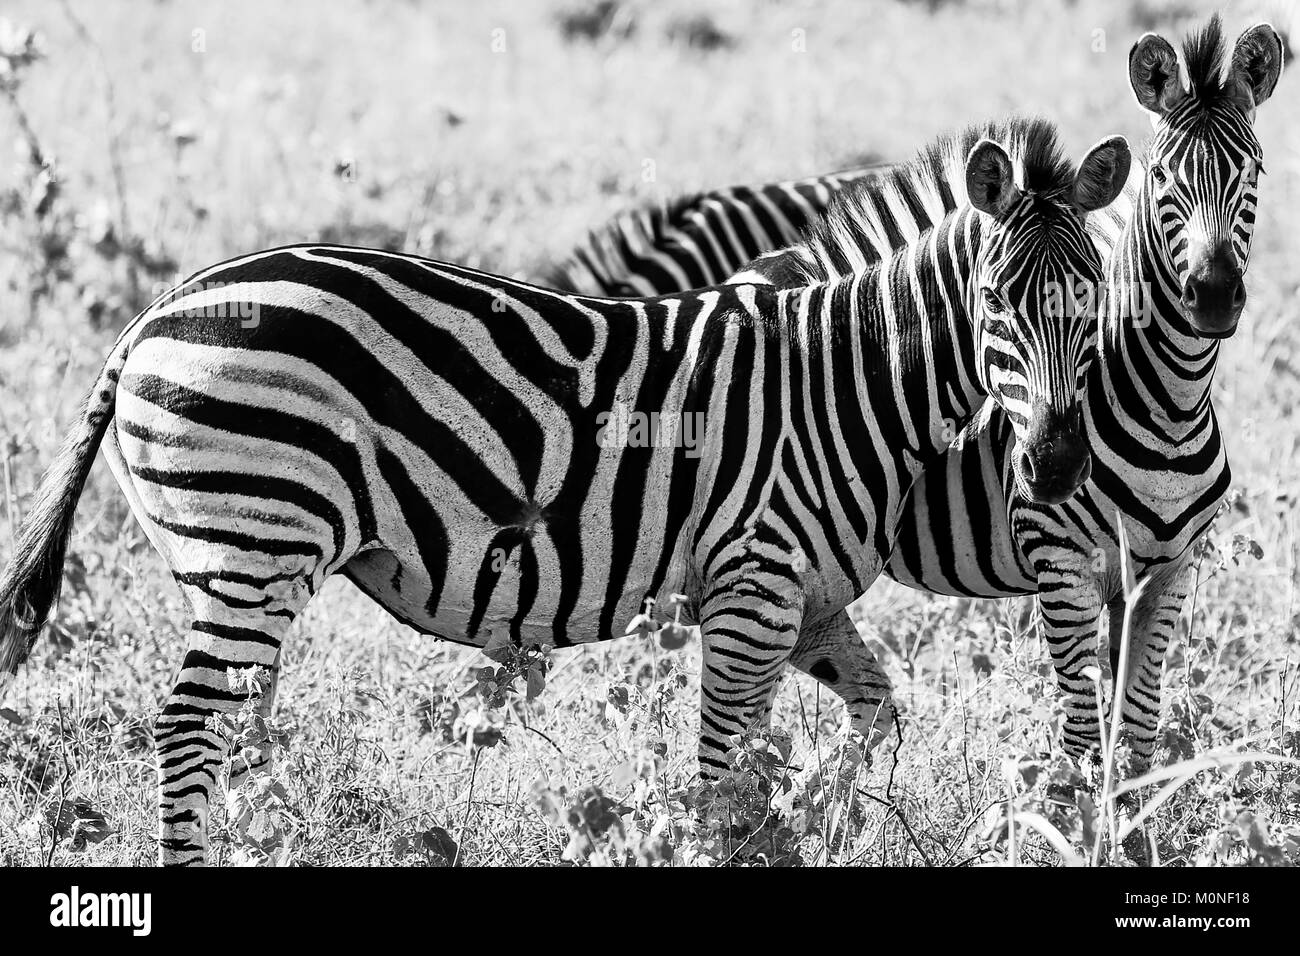 A pair of Zebra looking into lens in black and white with grassland blurred background Stock Photo